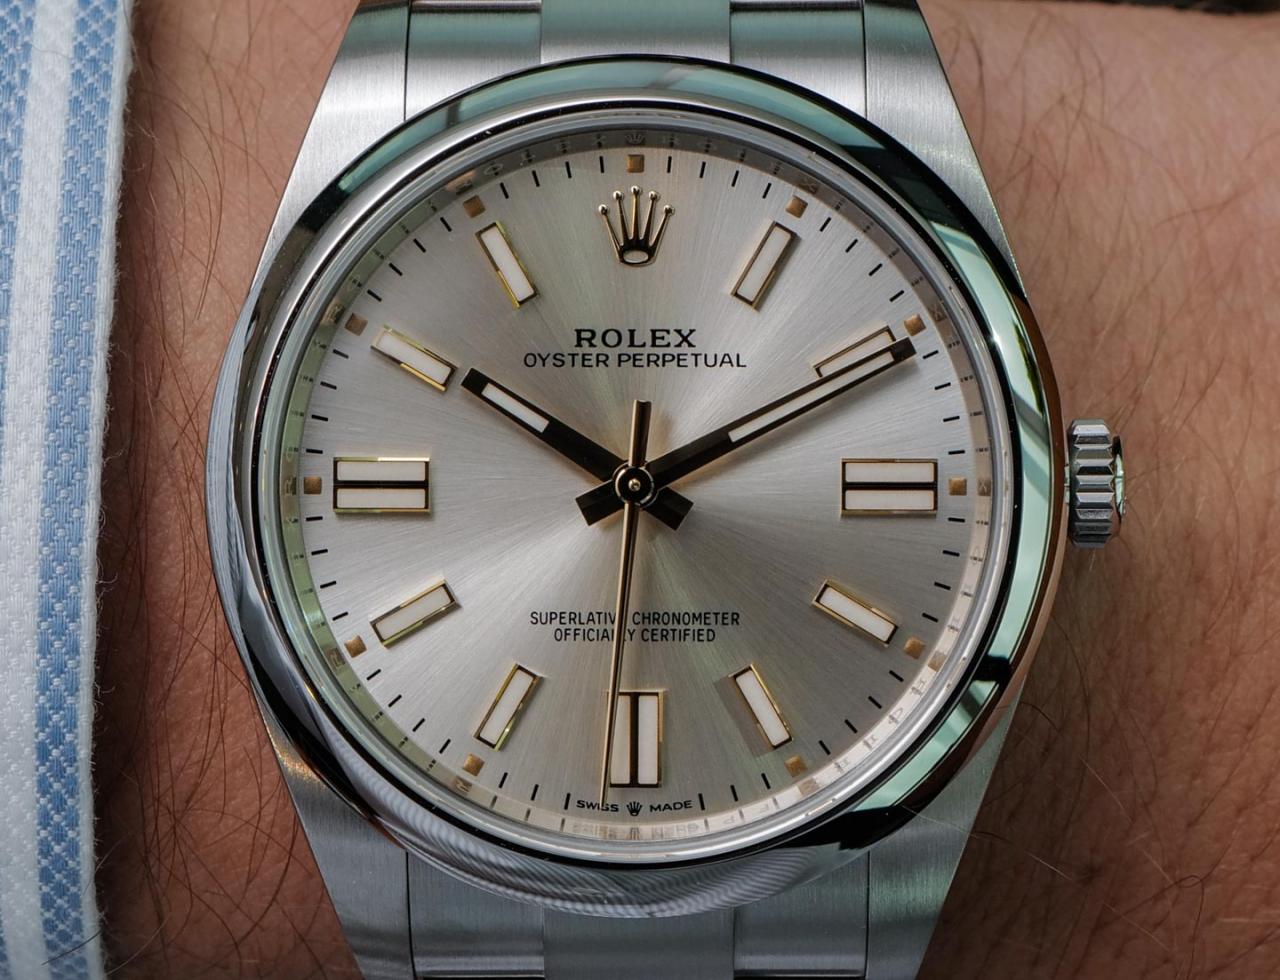 Rolex Oyster Perpetual 41 124300 Replica Watches Debut For 2020